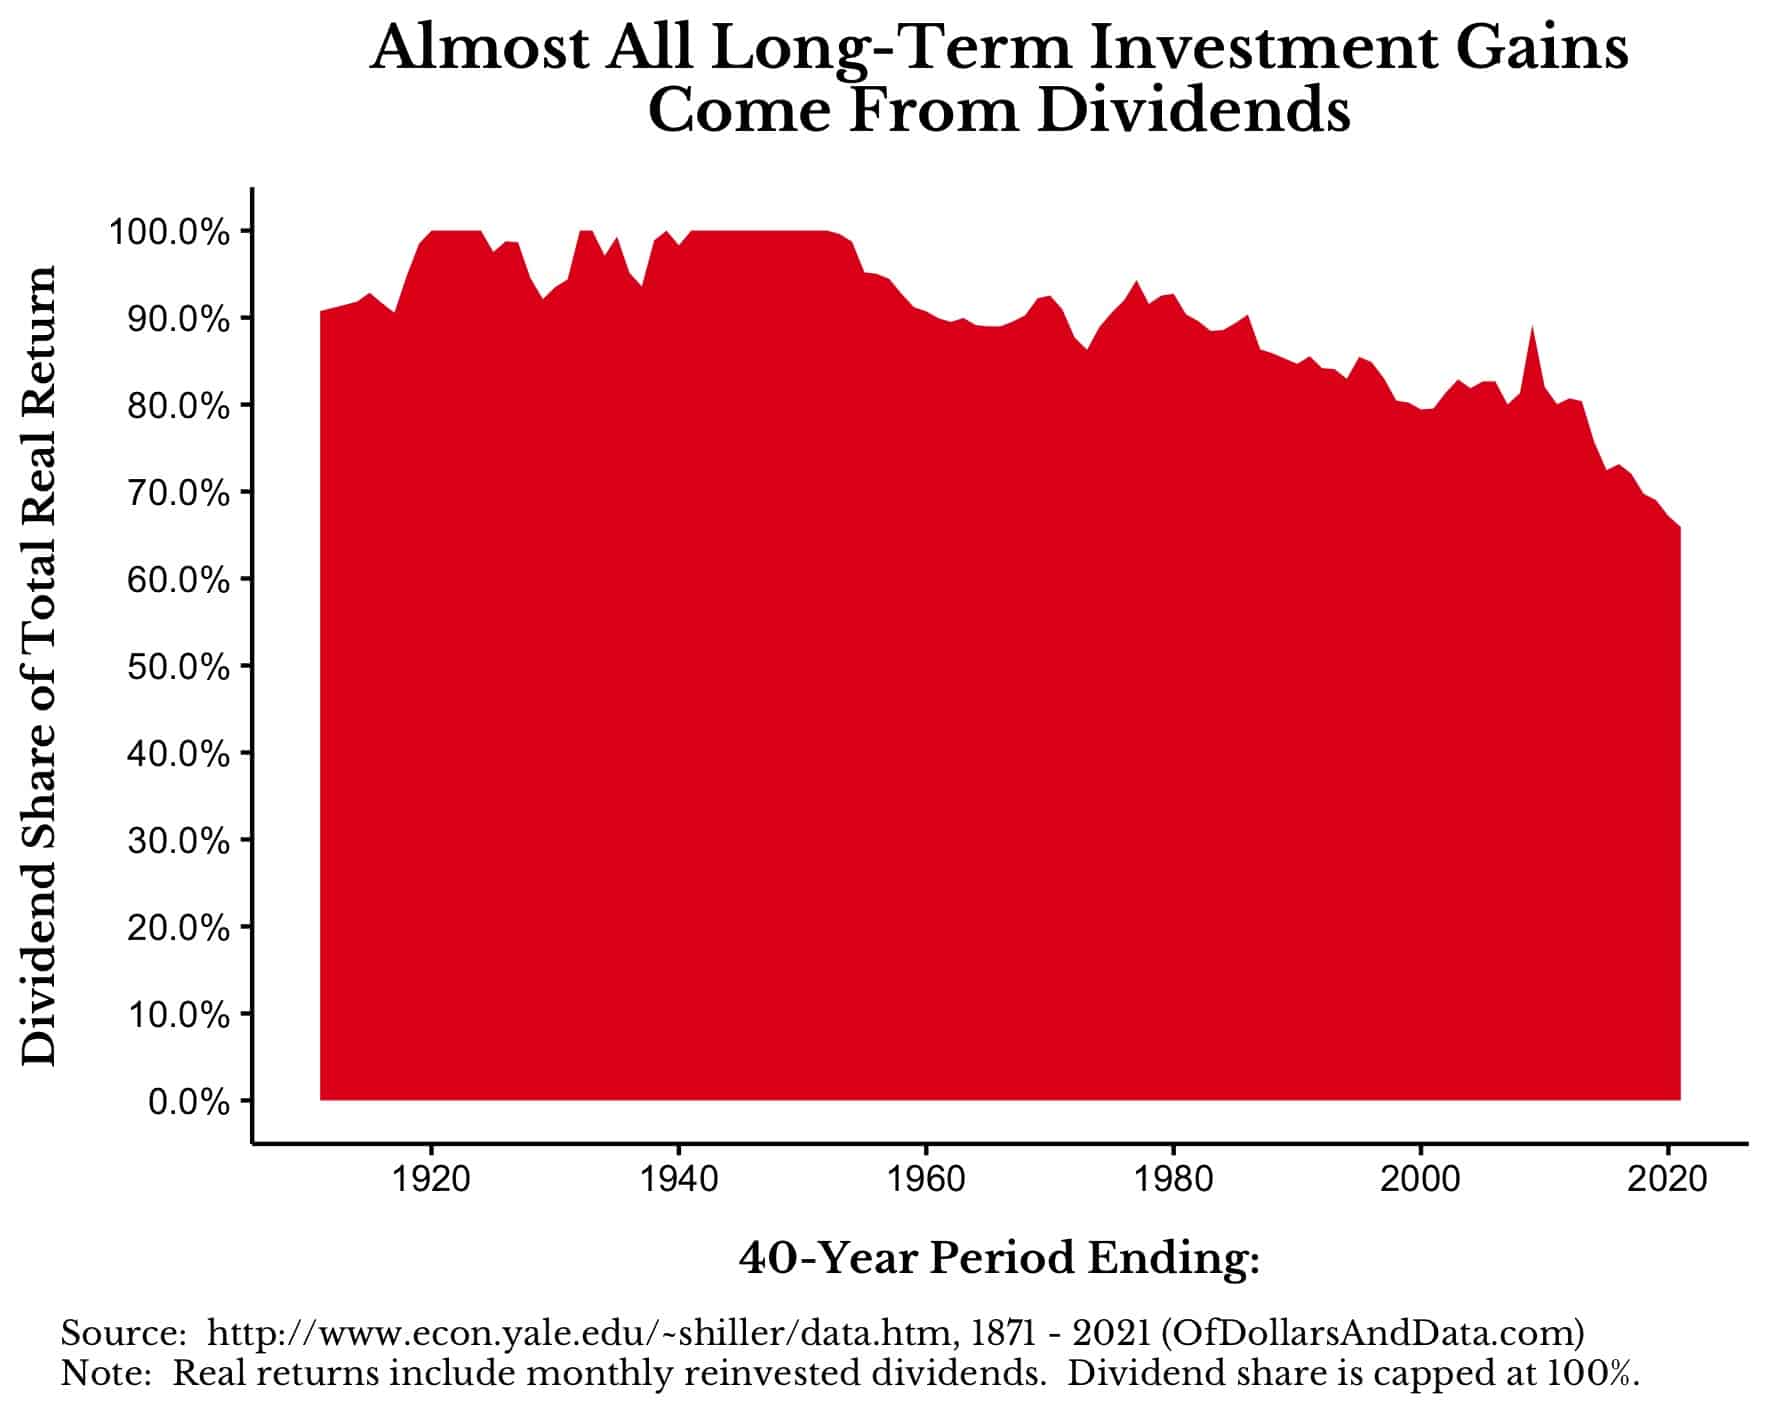 Chart showing the percentage of real US stock return coming from dividends over all 40 year periods from 1871 to 2021.